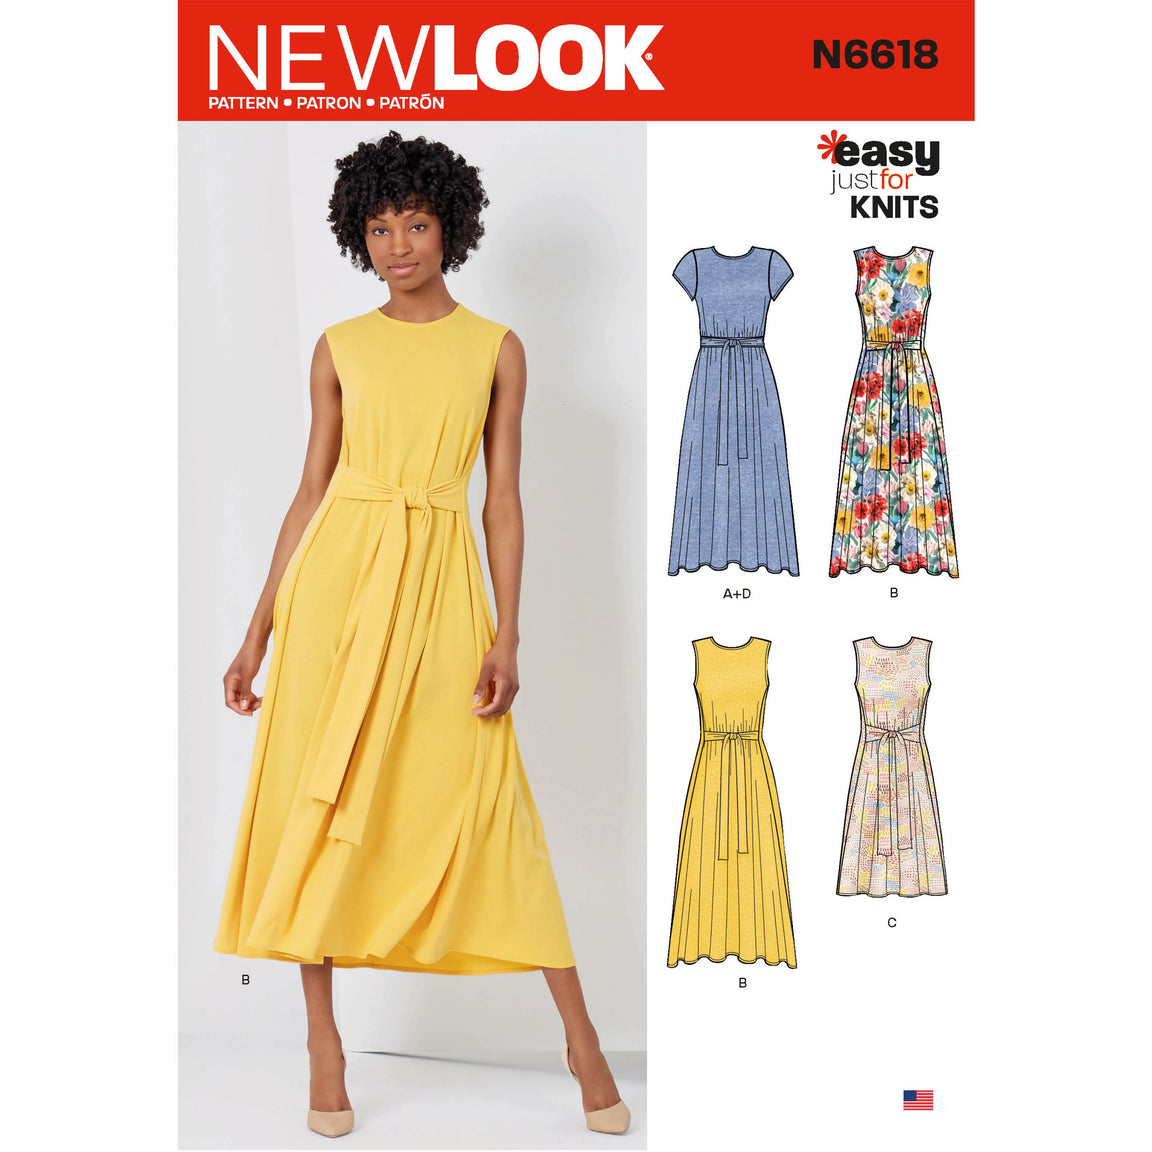 New Look Sewing Patterns — Page 4 — jaycotts.co.uk - Sewing Supplies